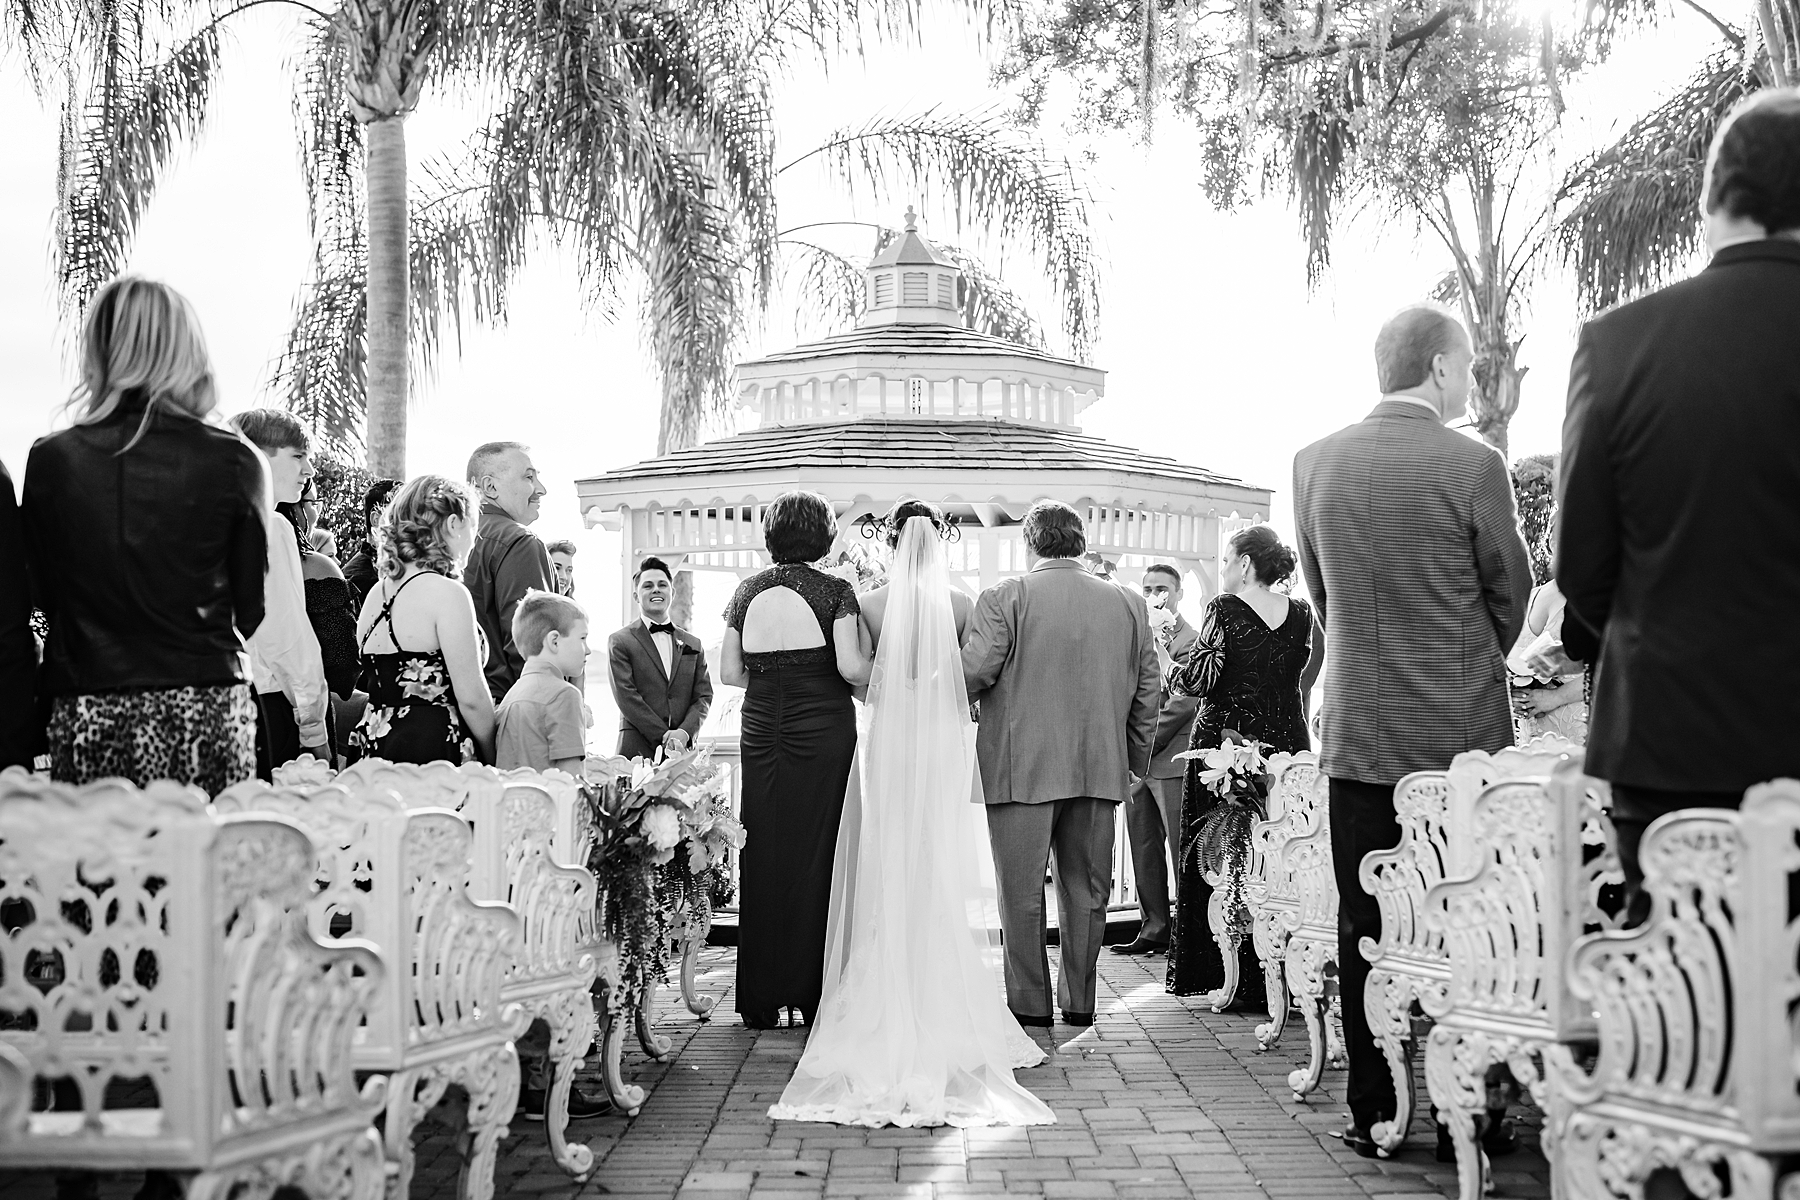 Wedding Ceremony ideas | Town Manor | Chynna Pacheco Photography